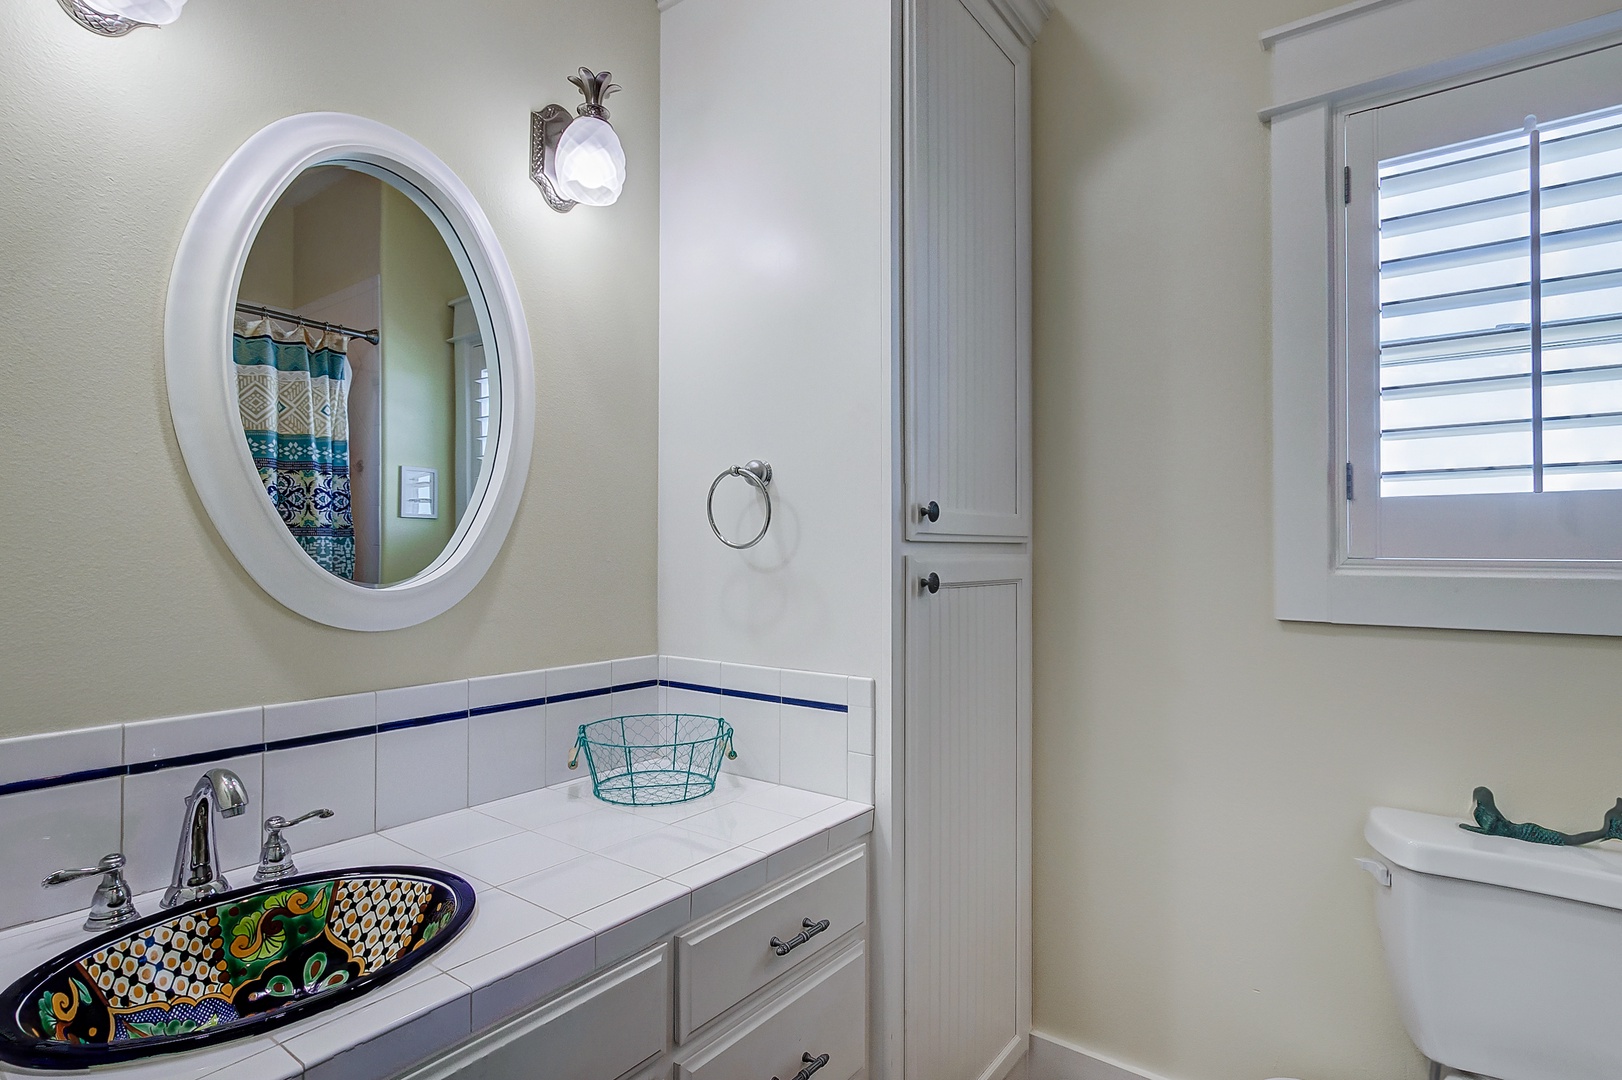 Attached guest bathroom